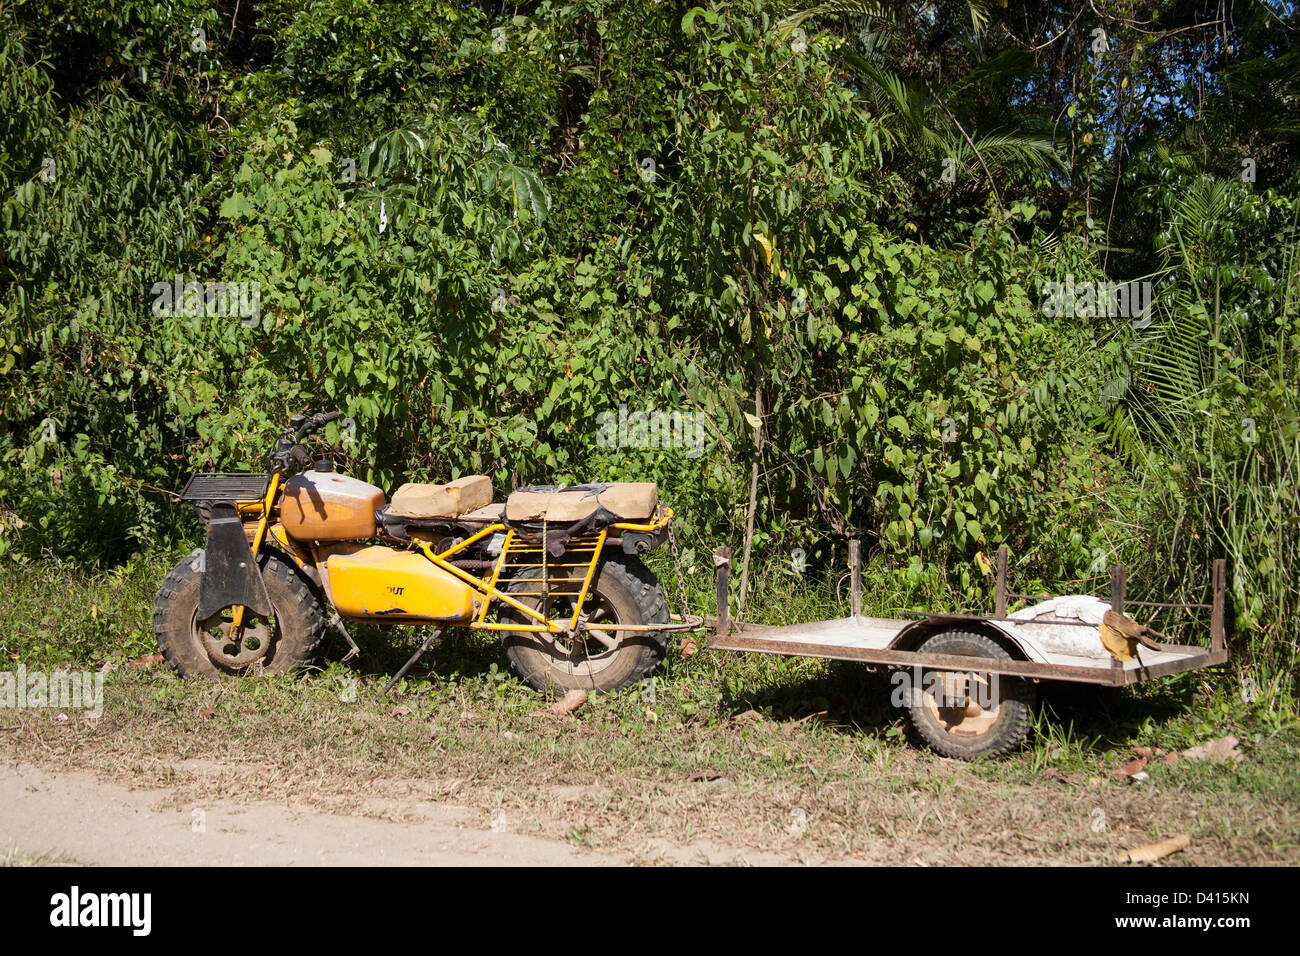 Old, used and small motorcycle with knobby tires and little trailer. Stock Photo